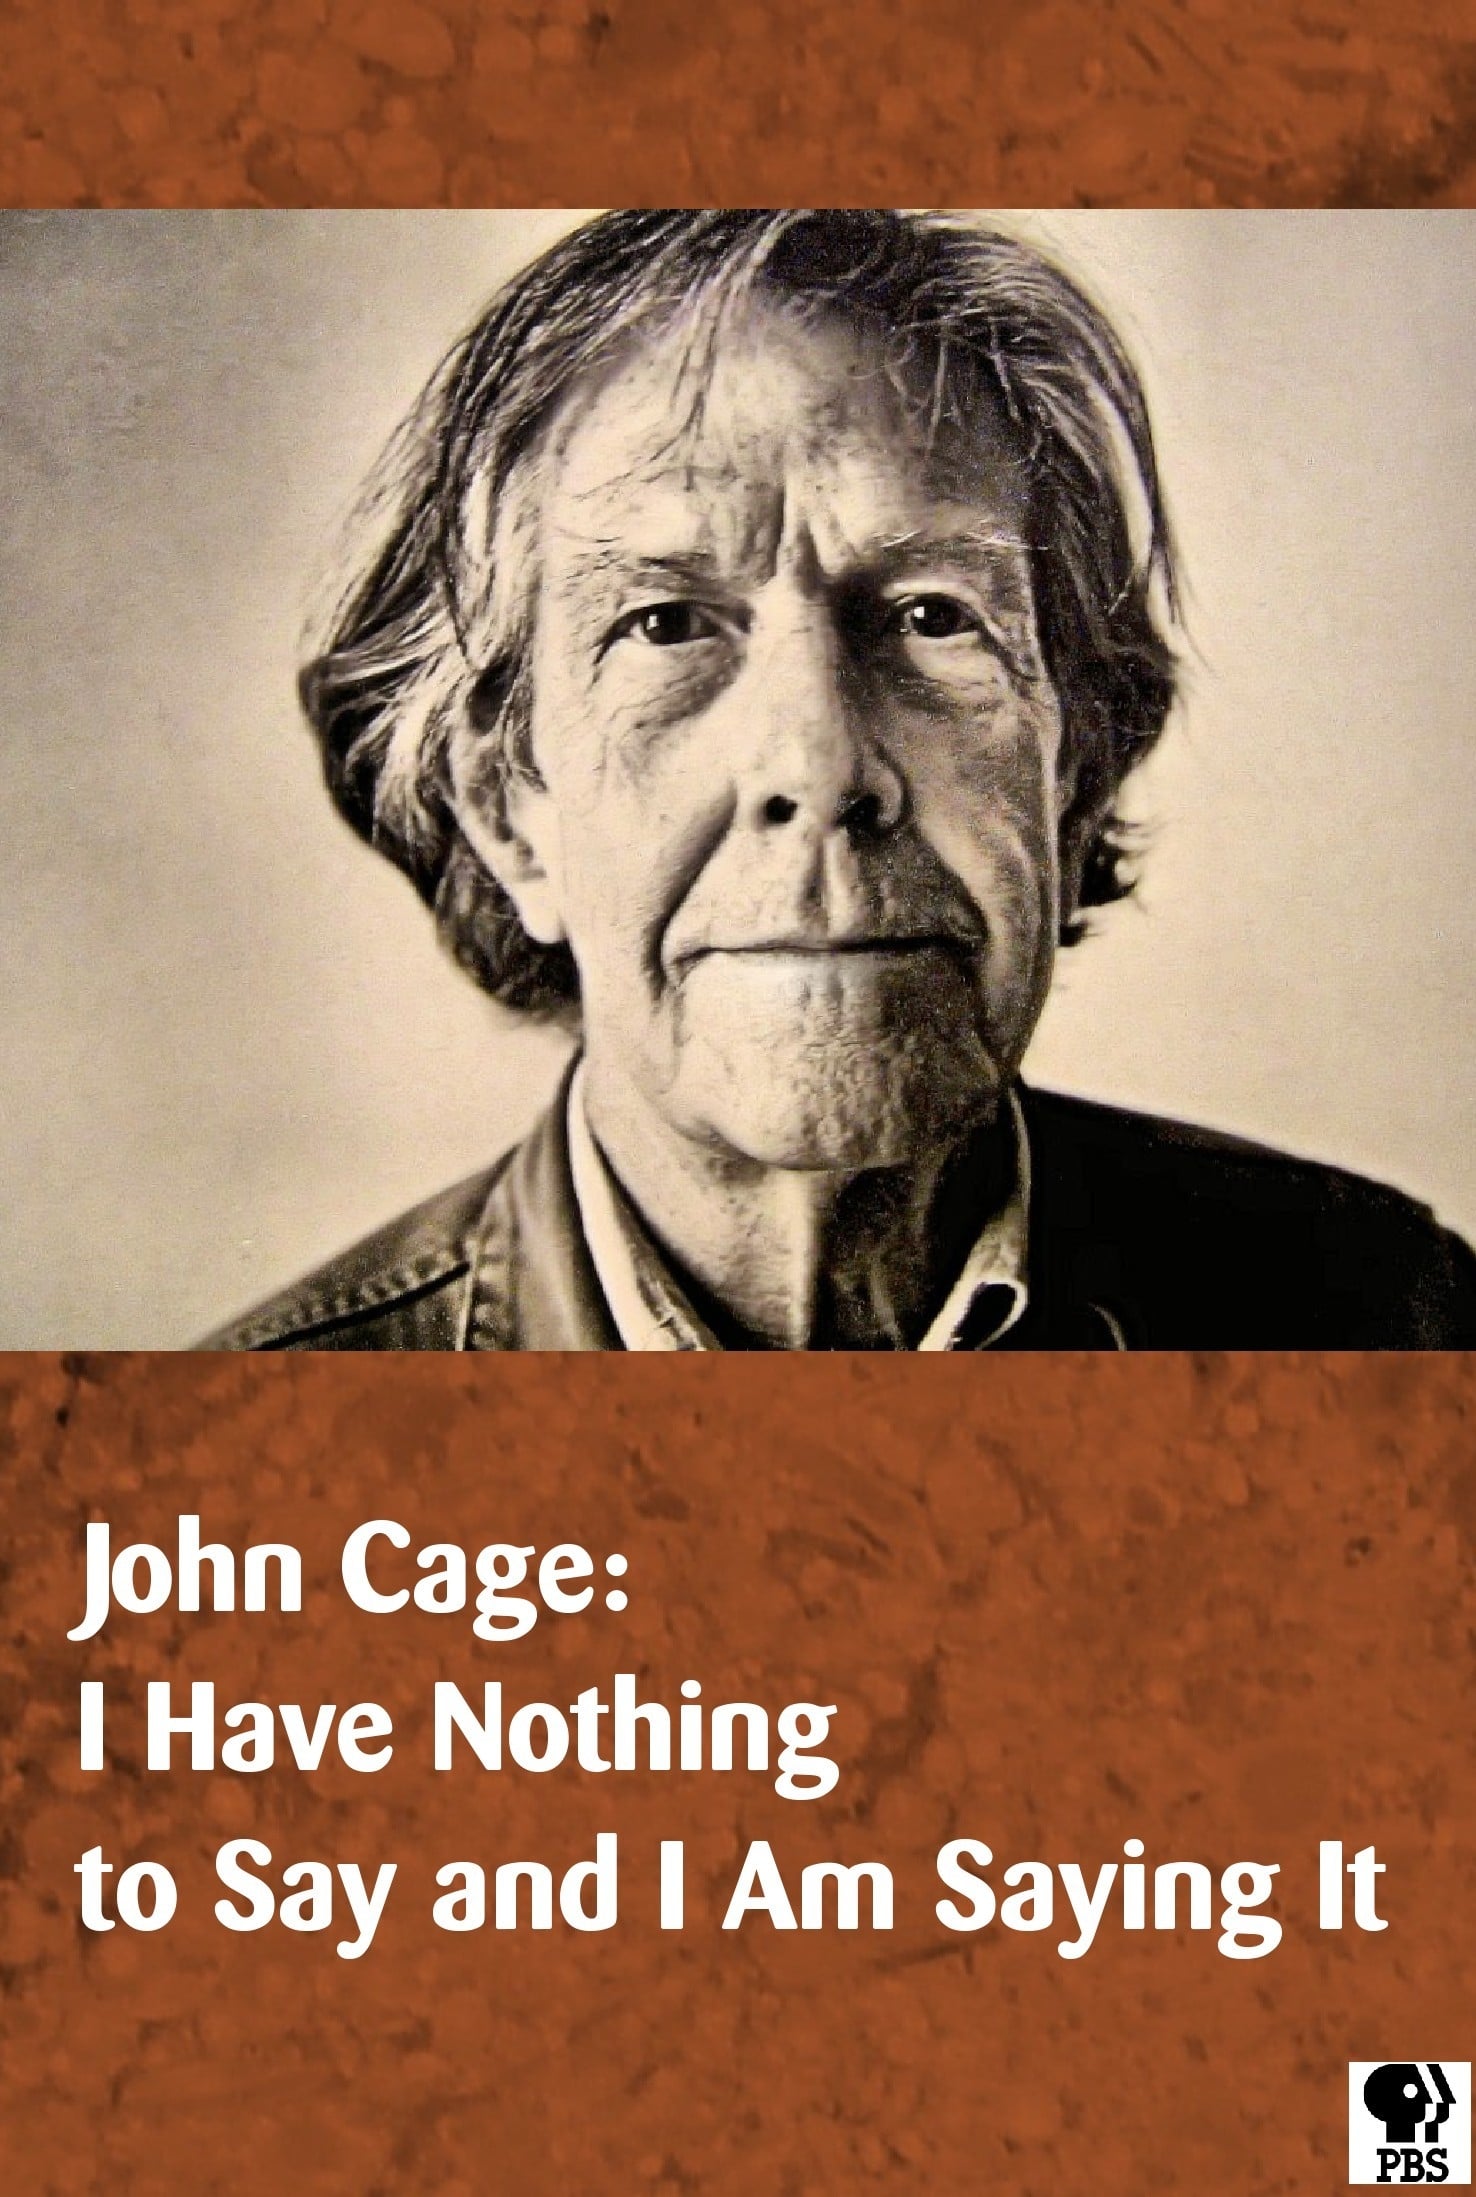 John Cage: I Have Nothing to Say and I Am Saying It (1990)